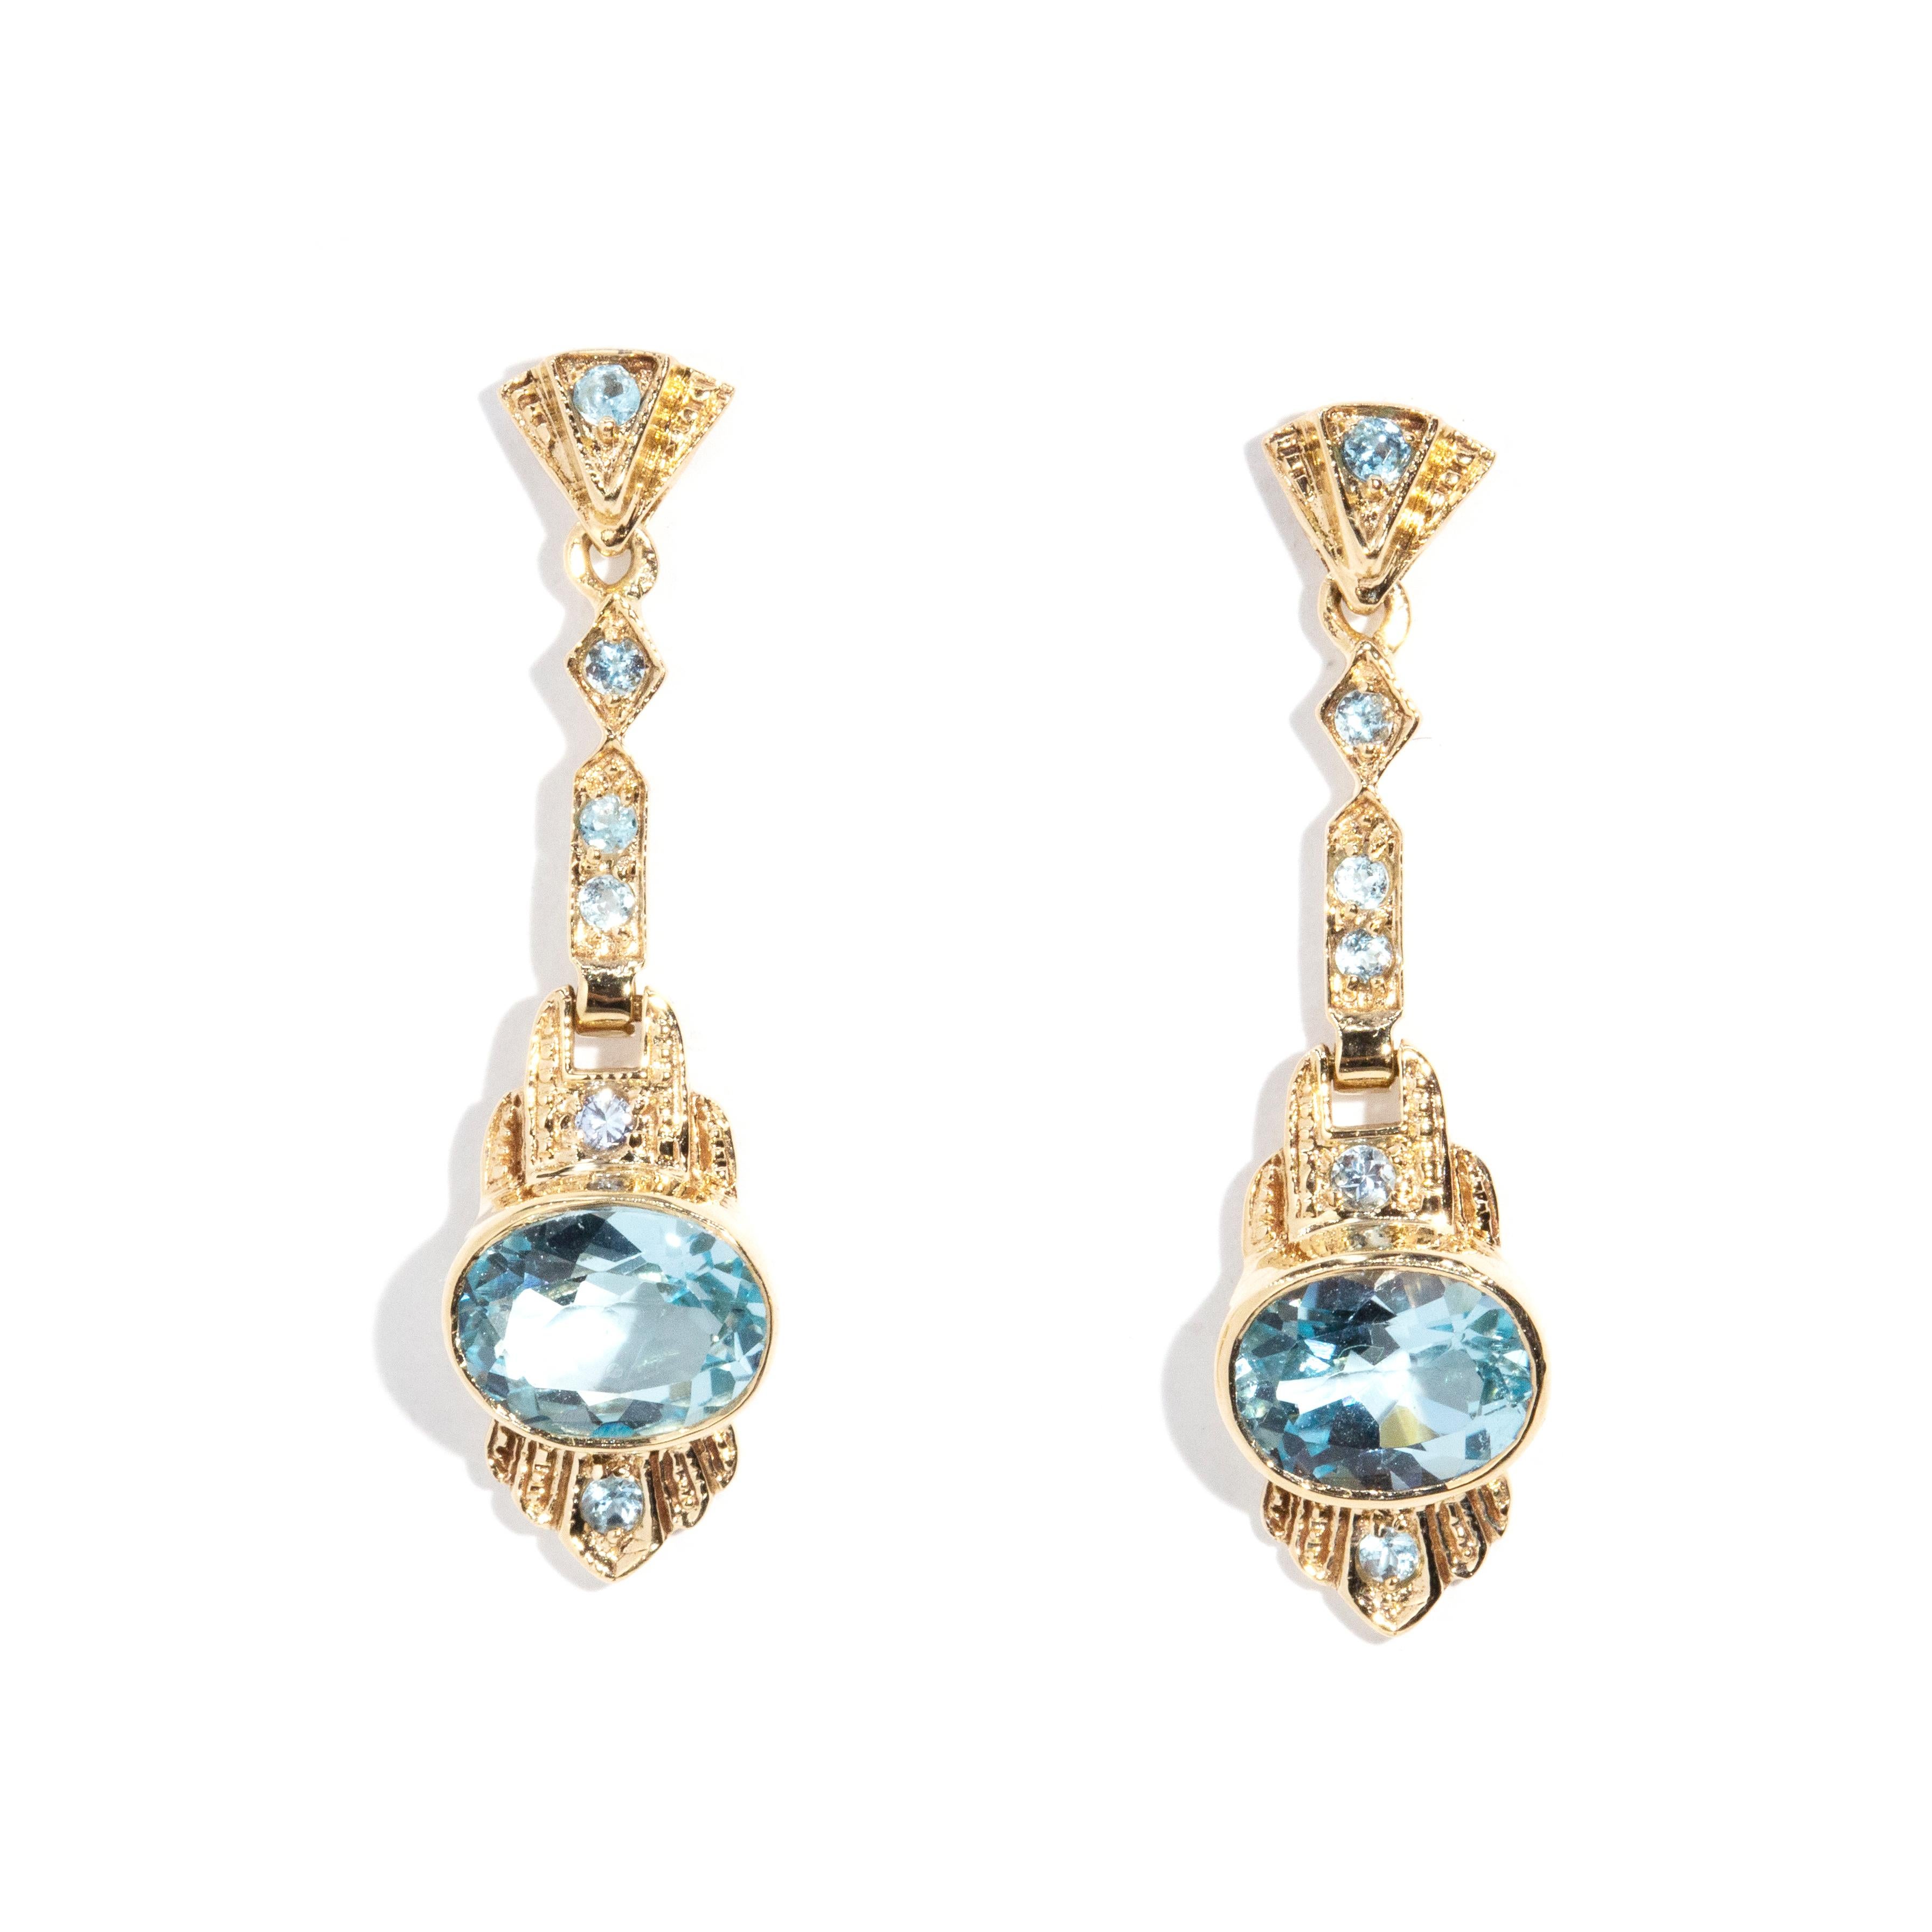 Contemporary Vintage Inspired Bright Blue Topaz Art Deco Style Drop Earrings 9 Carat Gold